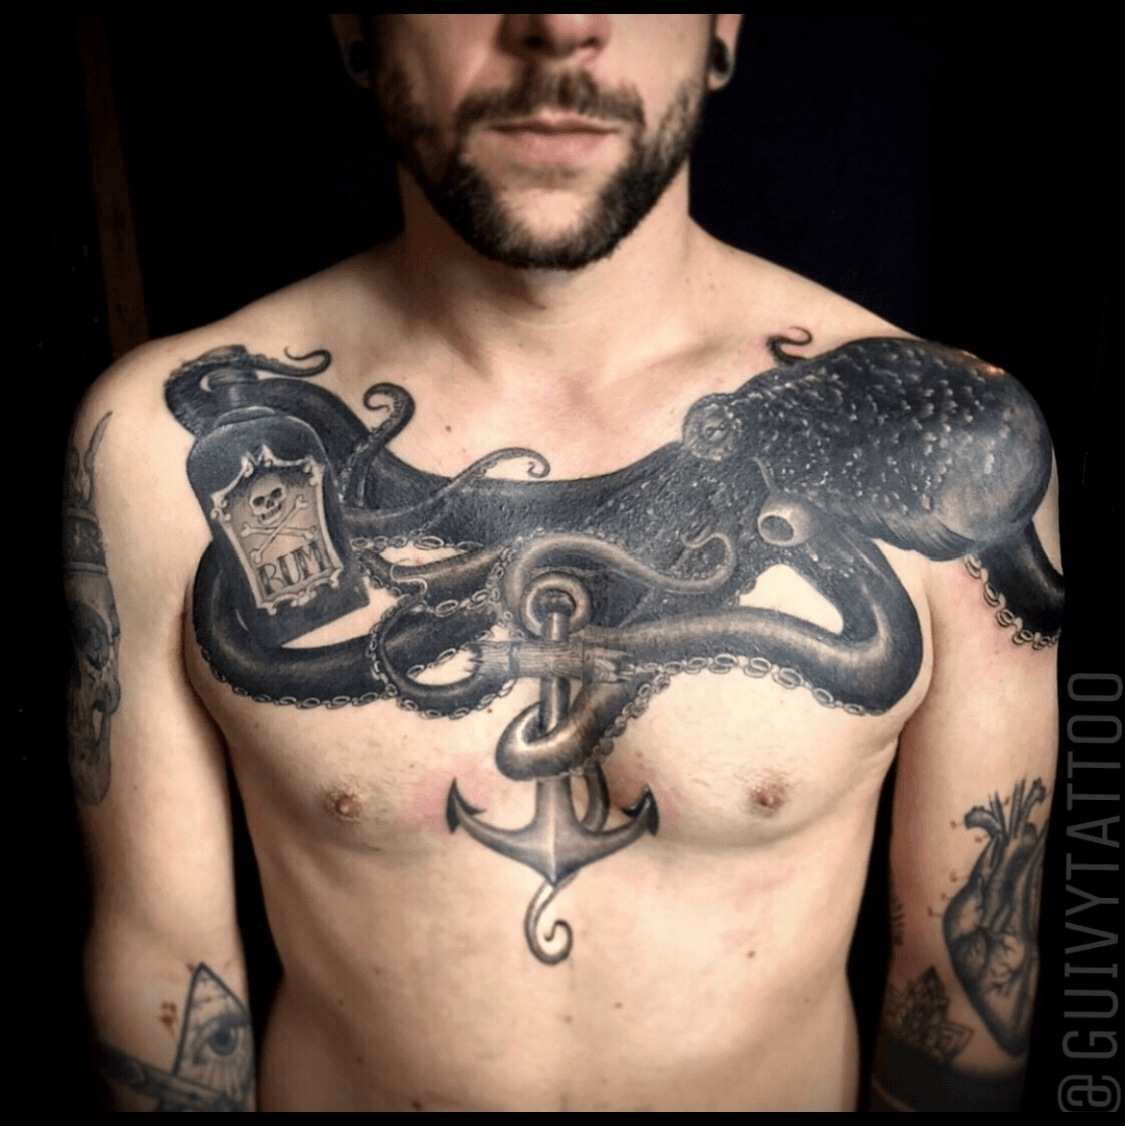 Tattoo uploaded by Camoz  Octopus for cover up on arm  Tattoodo